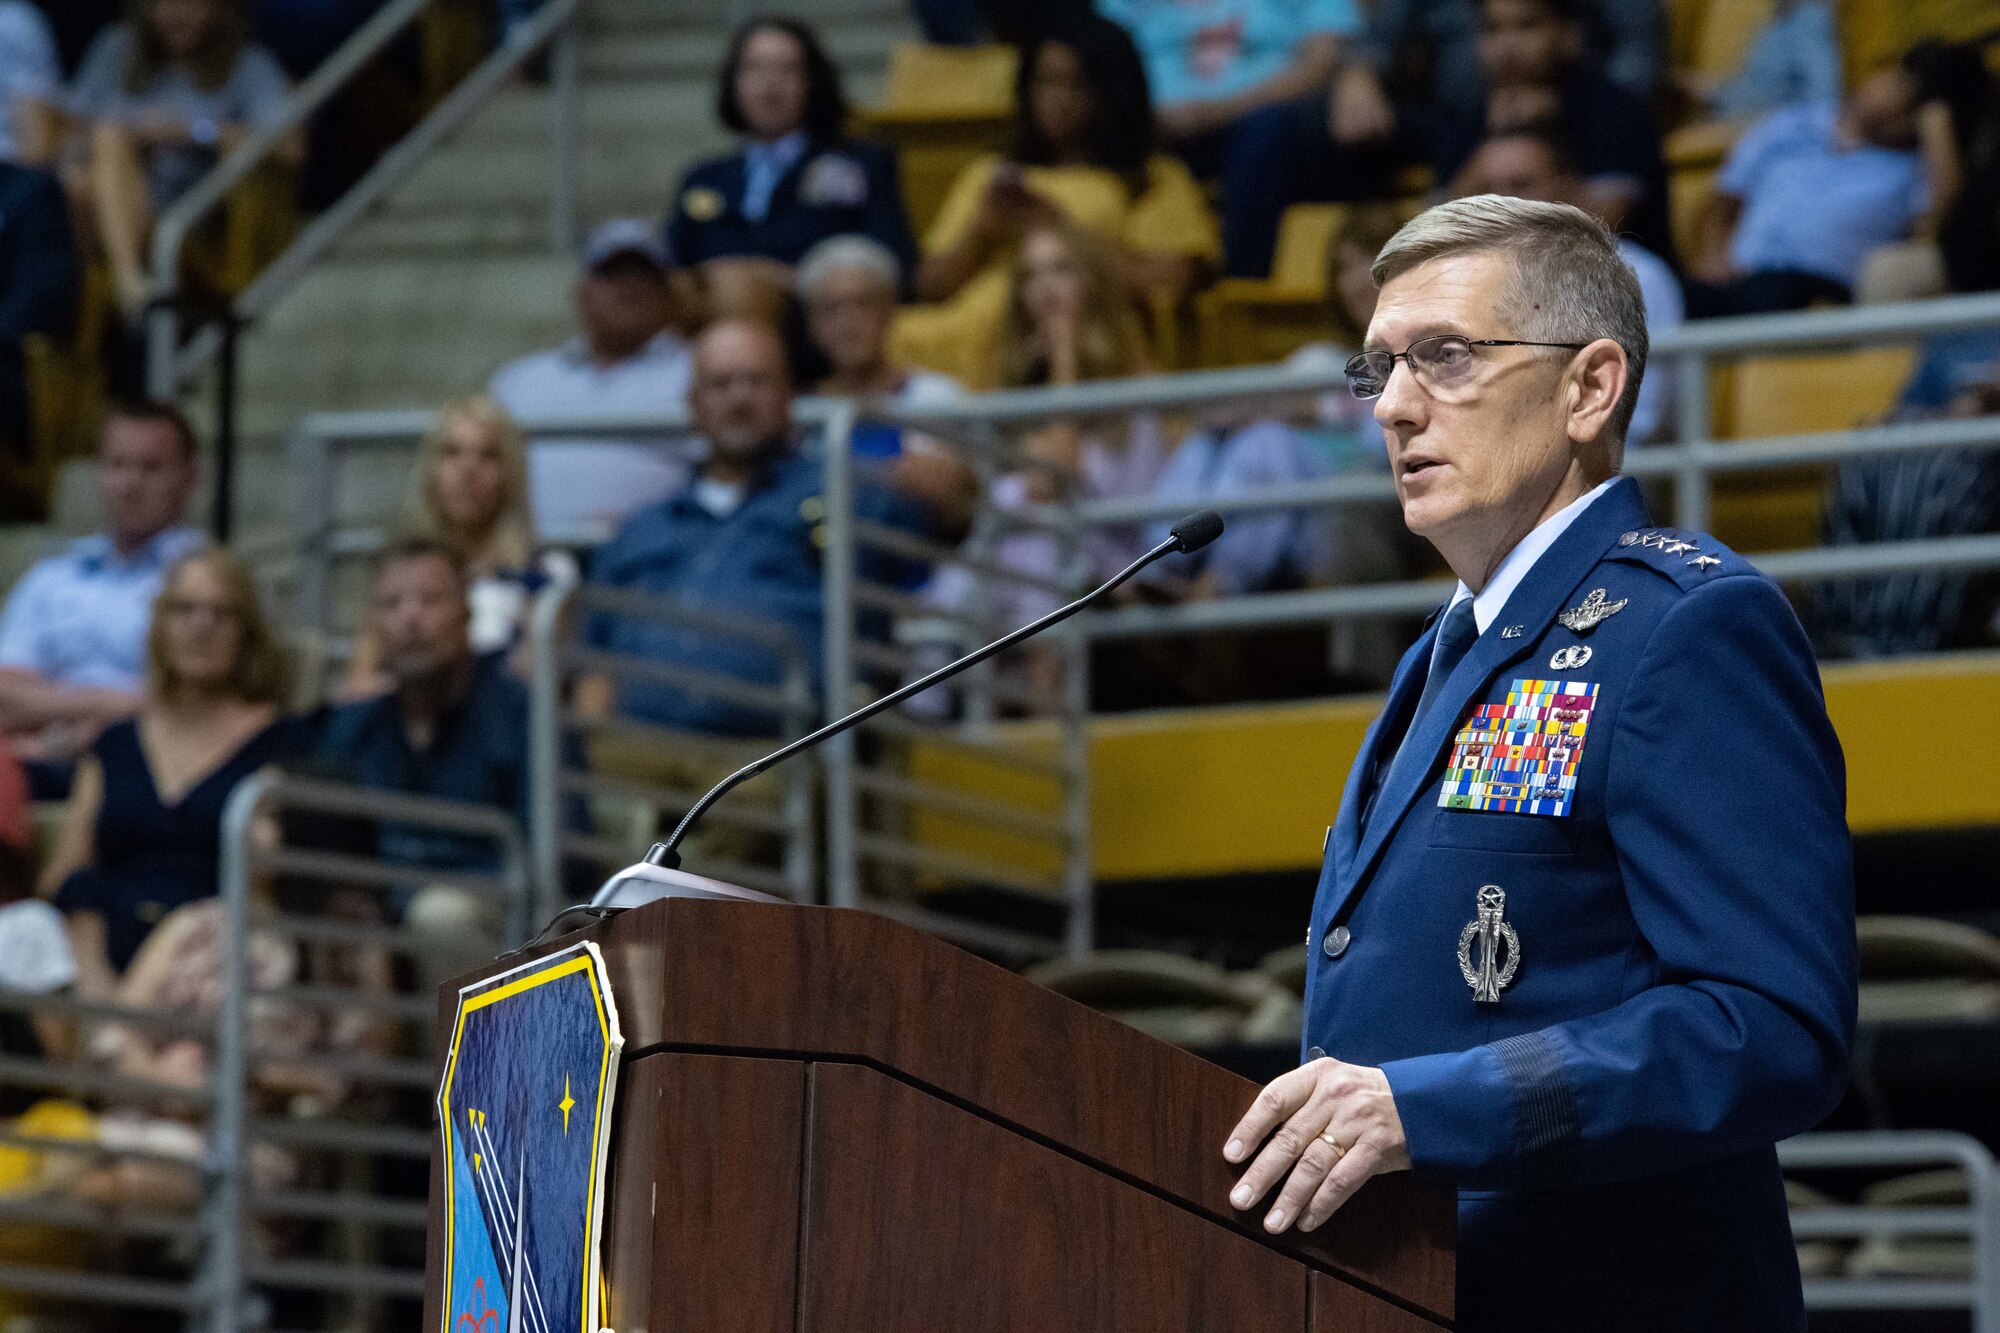 Gen. Tim Ray, Air Force Global Strike Command commander, speaks to new officers from Air University’s Officer Training School “Godzilla” class 19-07 during an awards ceremony at the Alabama State University Acadome, Montgomery, Ala., Sept. 26, 2019. Volunteers attending OTS spend their days in physical training, classroom instruction, leadership mentoring and more on their way to gaining their commission as officers within the Air Force.